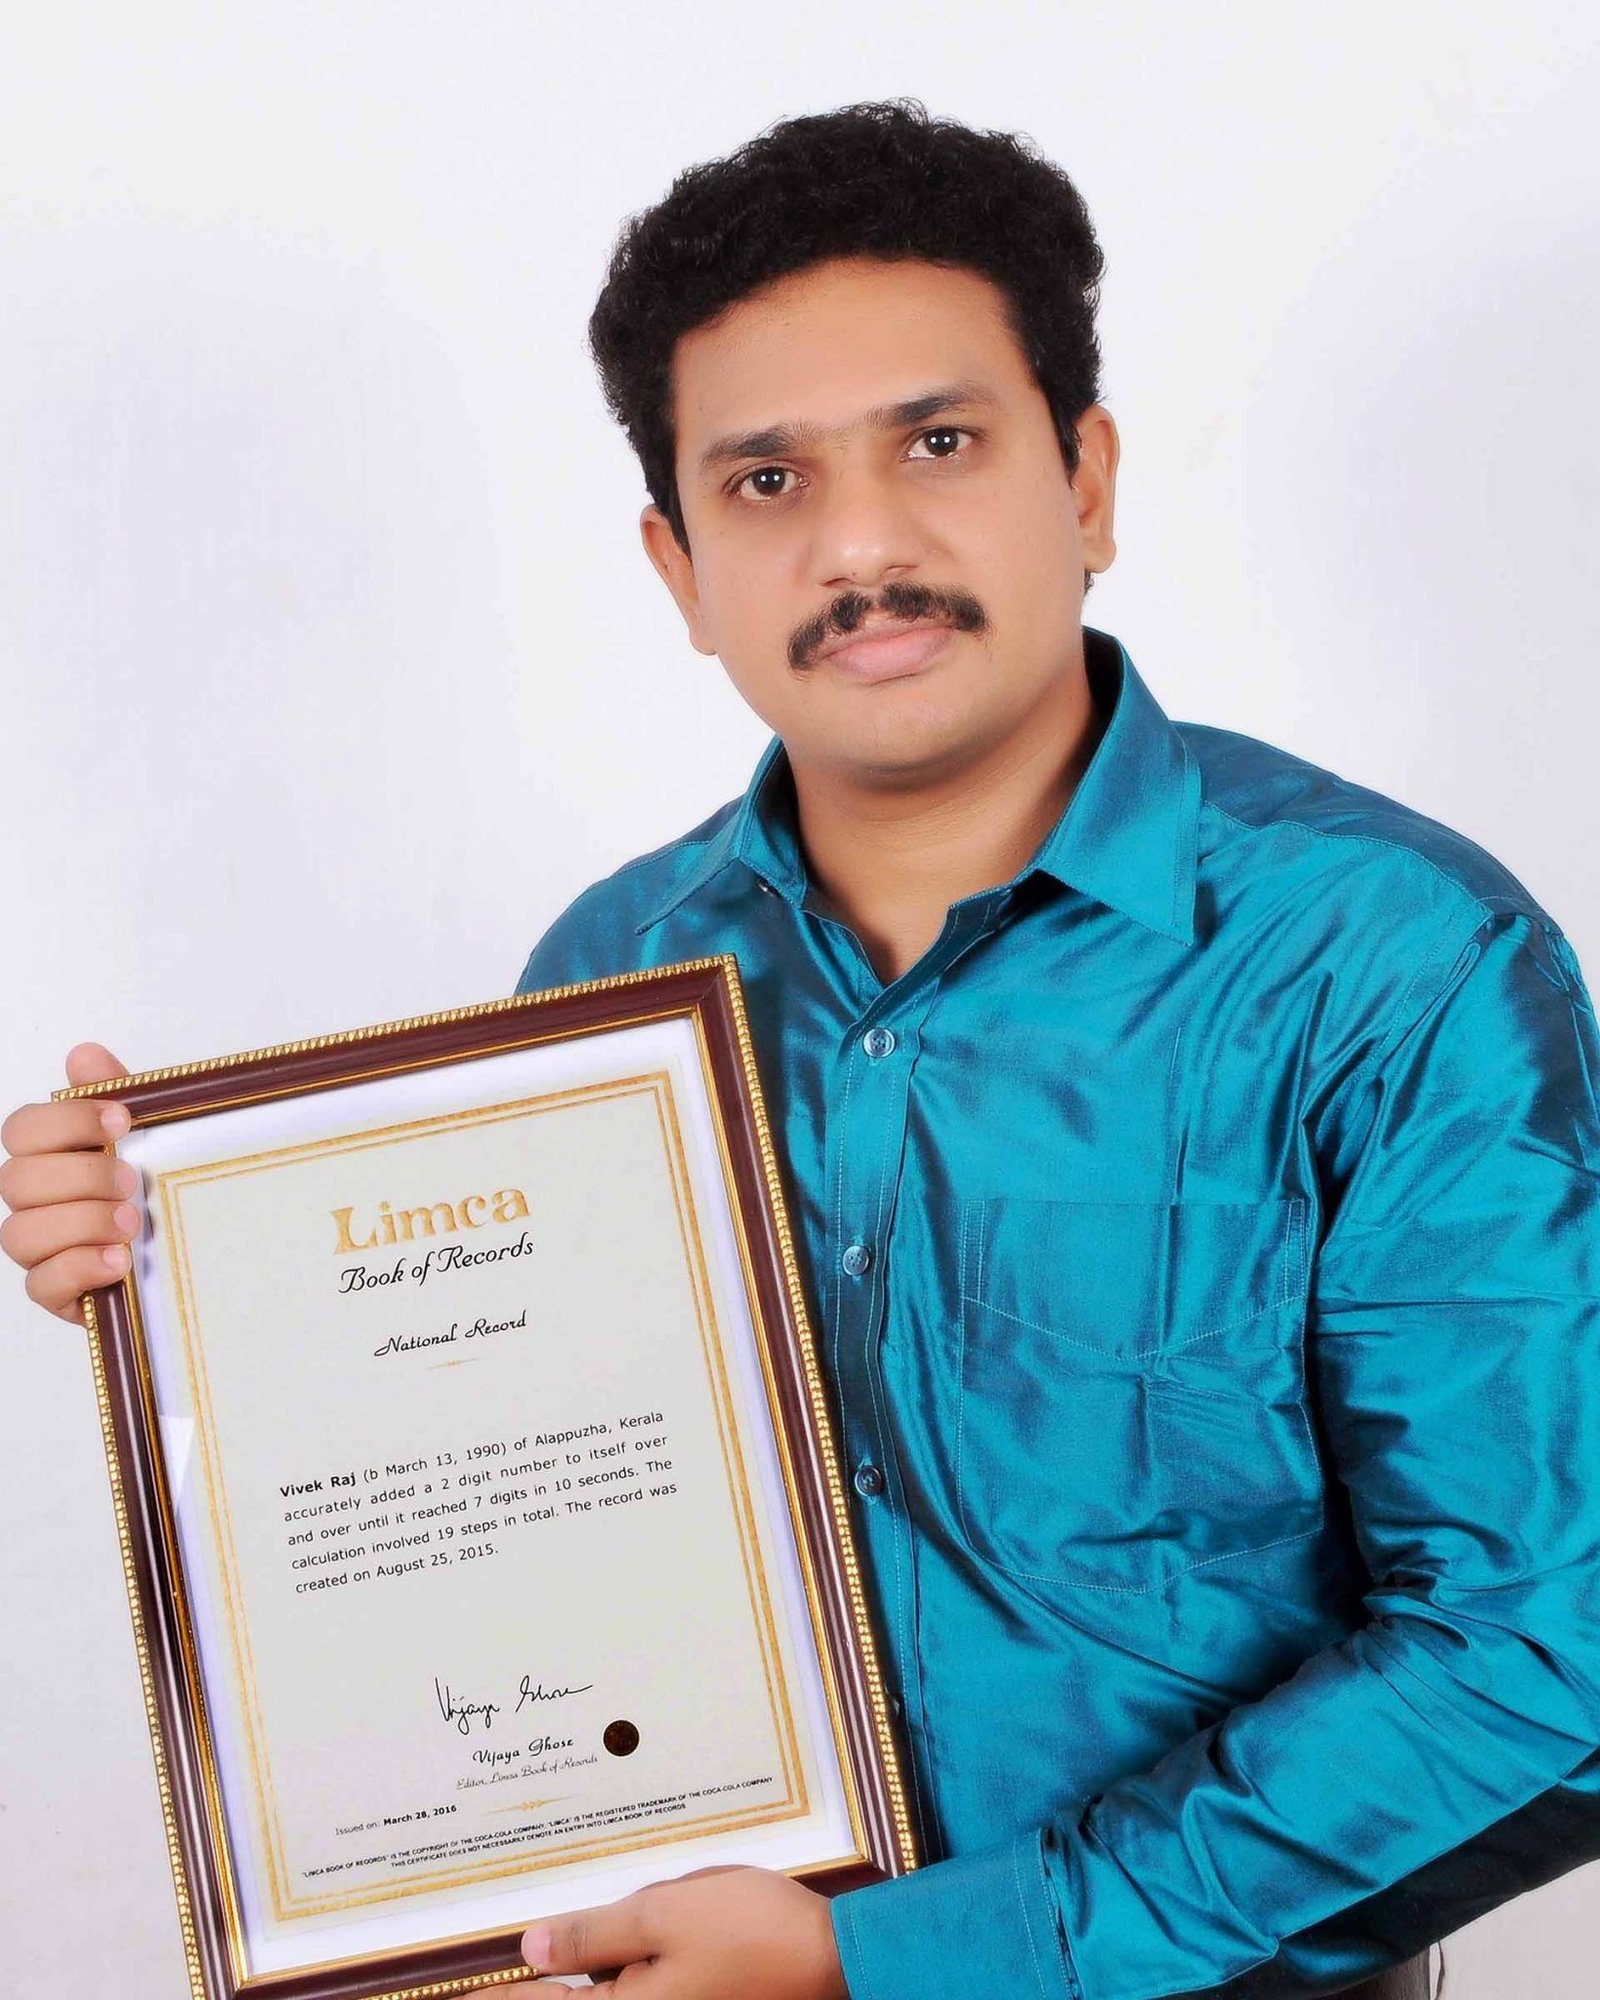 Holder of Limca Book of Records